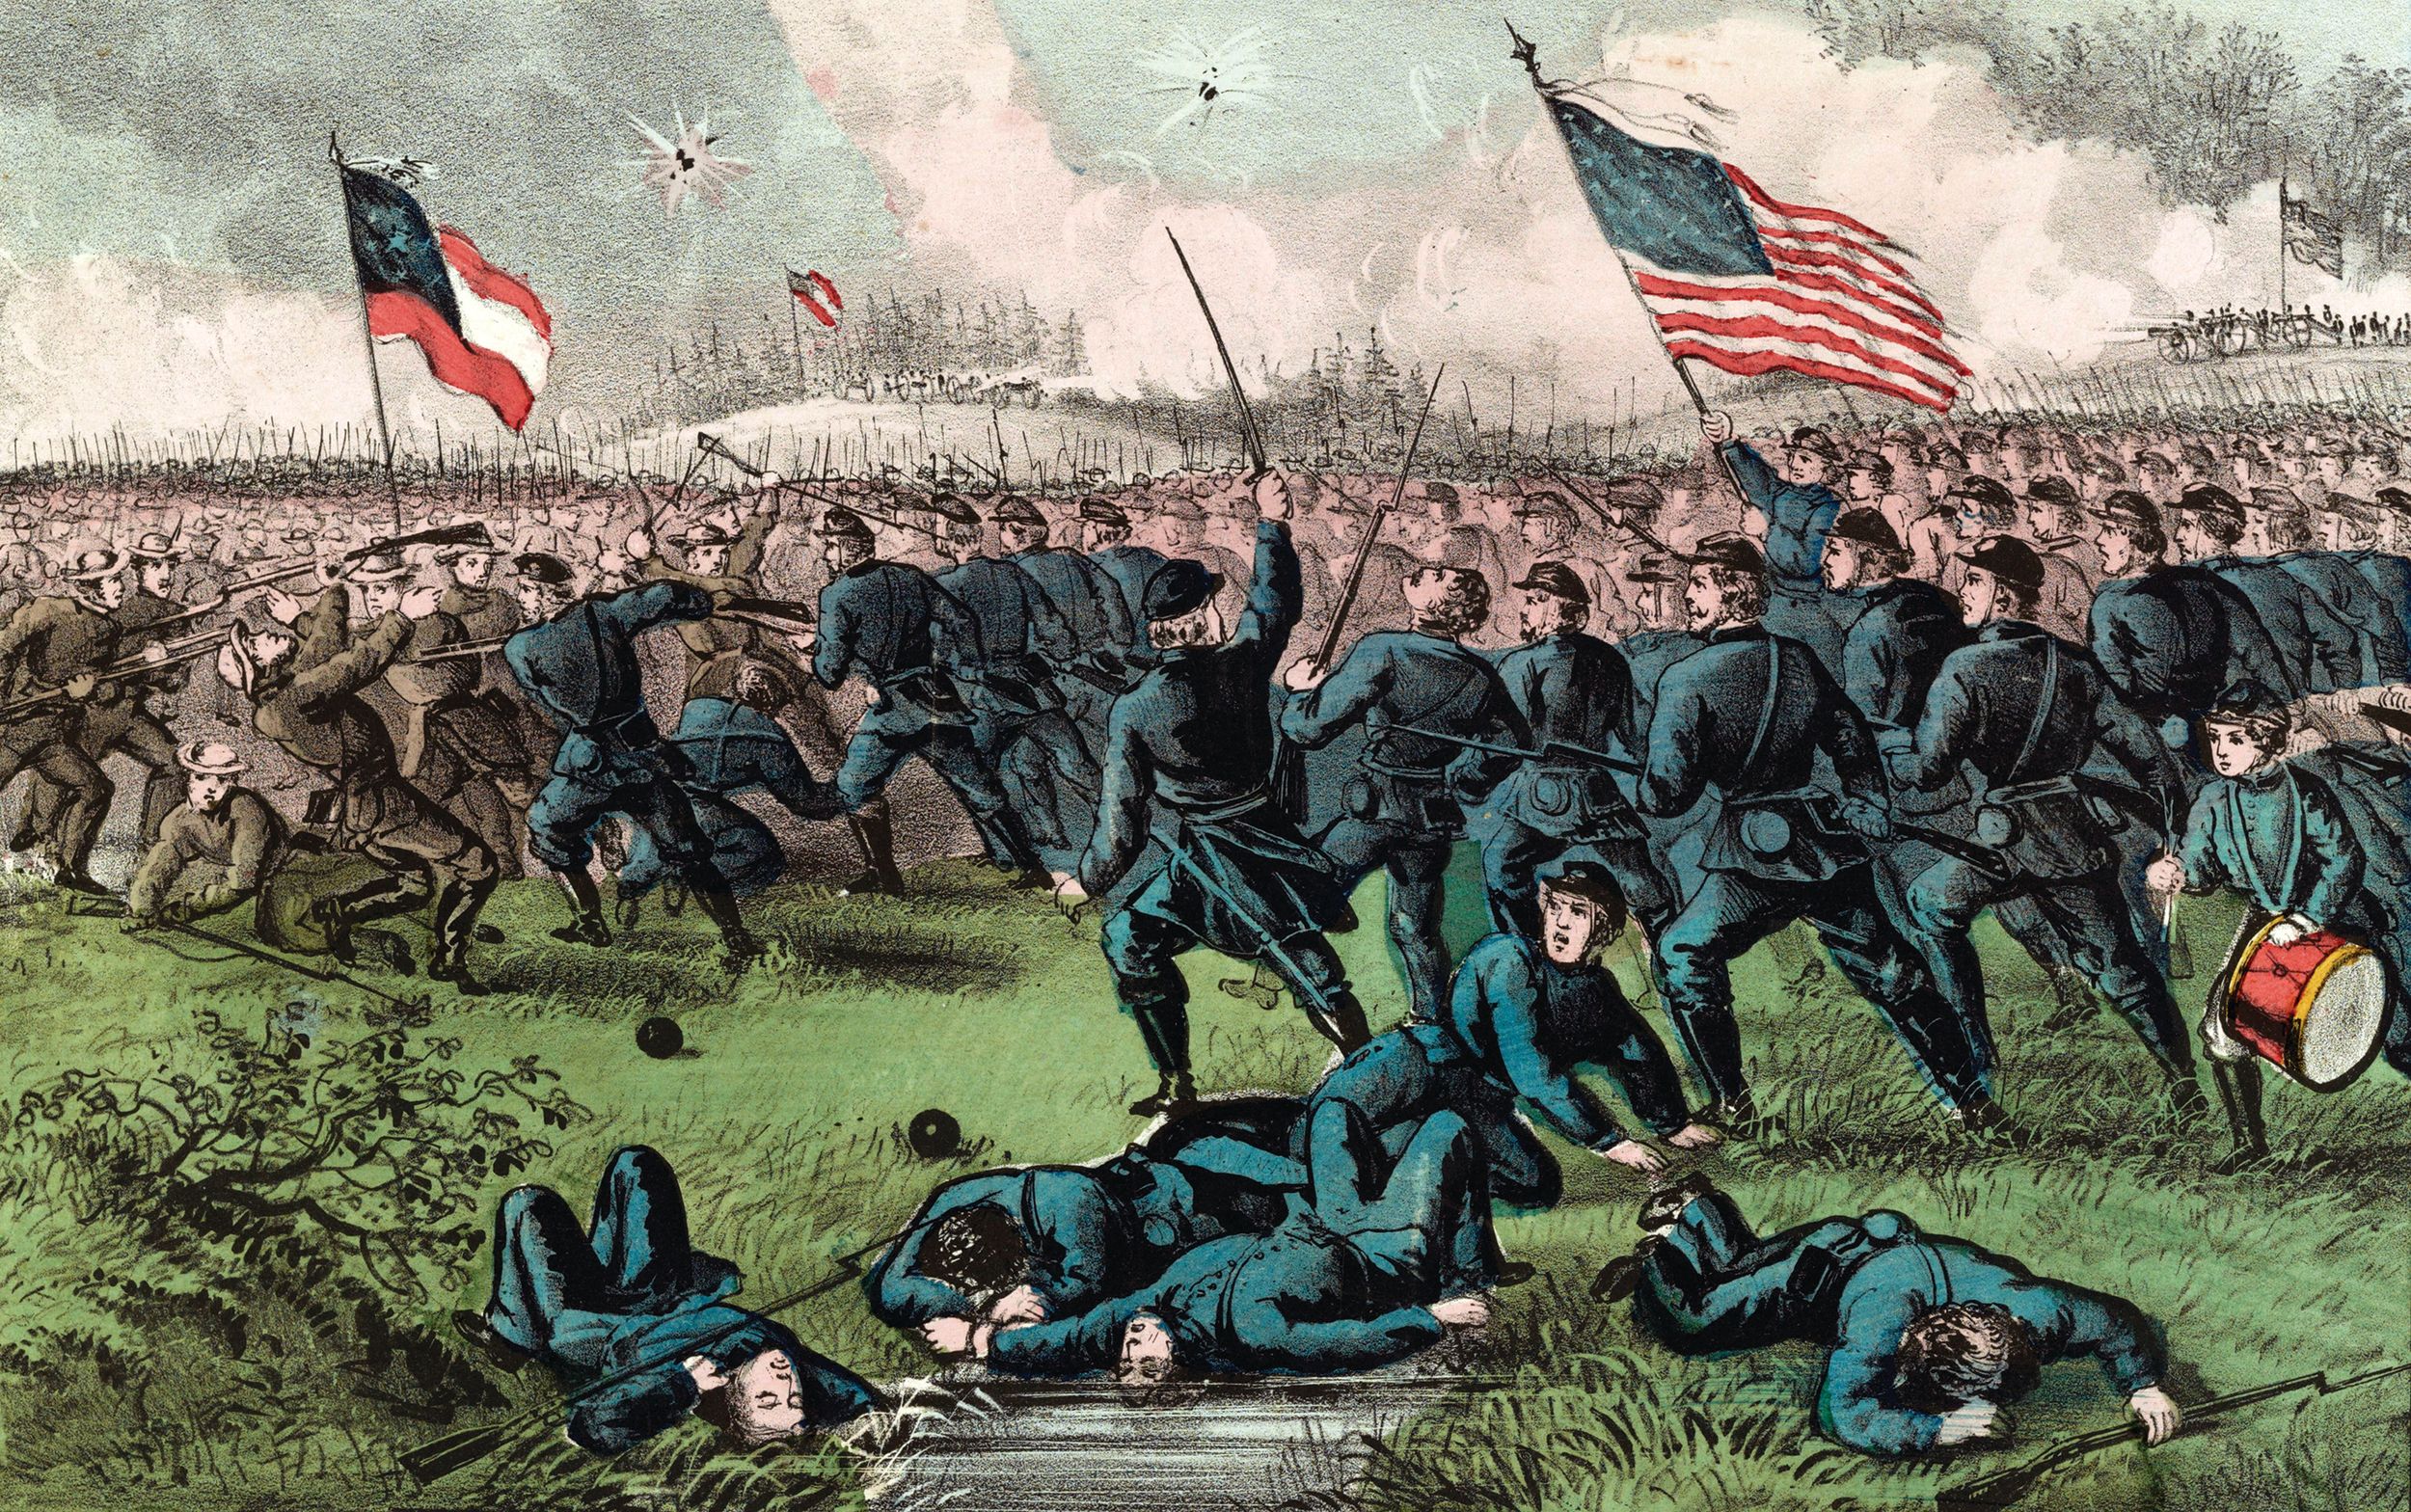 Called the Battle of Corinth (also Second Battle of Corinth by some)—to differentiate it from the Siege of Corinth earlier that year, the clash on October 3-4, 1862, in northwest Mississippi was the last chance for the Confederacy to hold onto the vital rail crossroads. This hand-colored Currier & Ives lithograph depicts Federal troops under General Grant fighting the combined Confederate forces of Generals Van Dorn, Price and Lovell. The original caption reads, in part, “the Rebels were utterly defeated and driven from the field, throwing away their arms and accoutrements and every thing that could impede their flight.”  